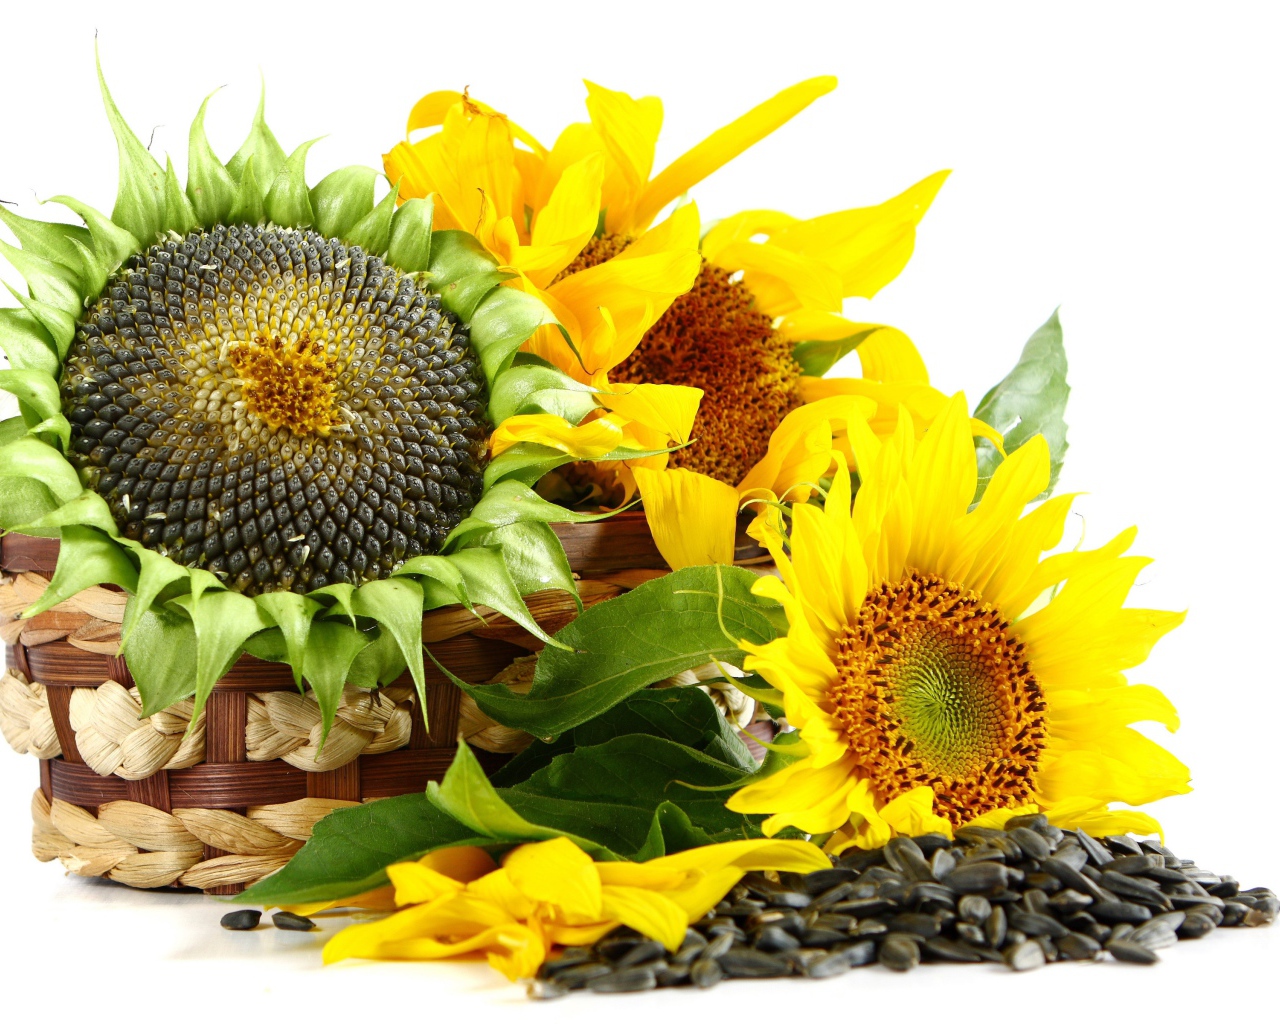 Basket with sunflowers on a white background with seeds